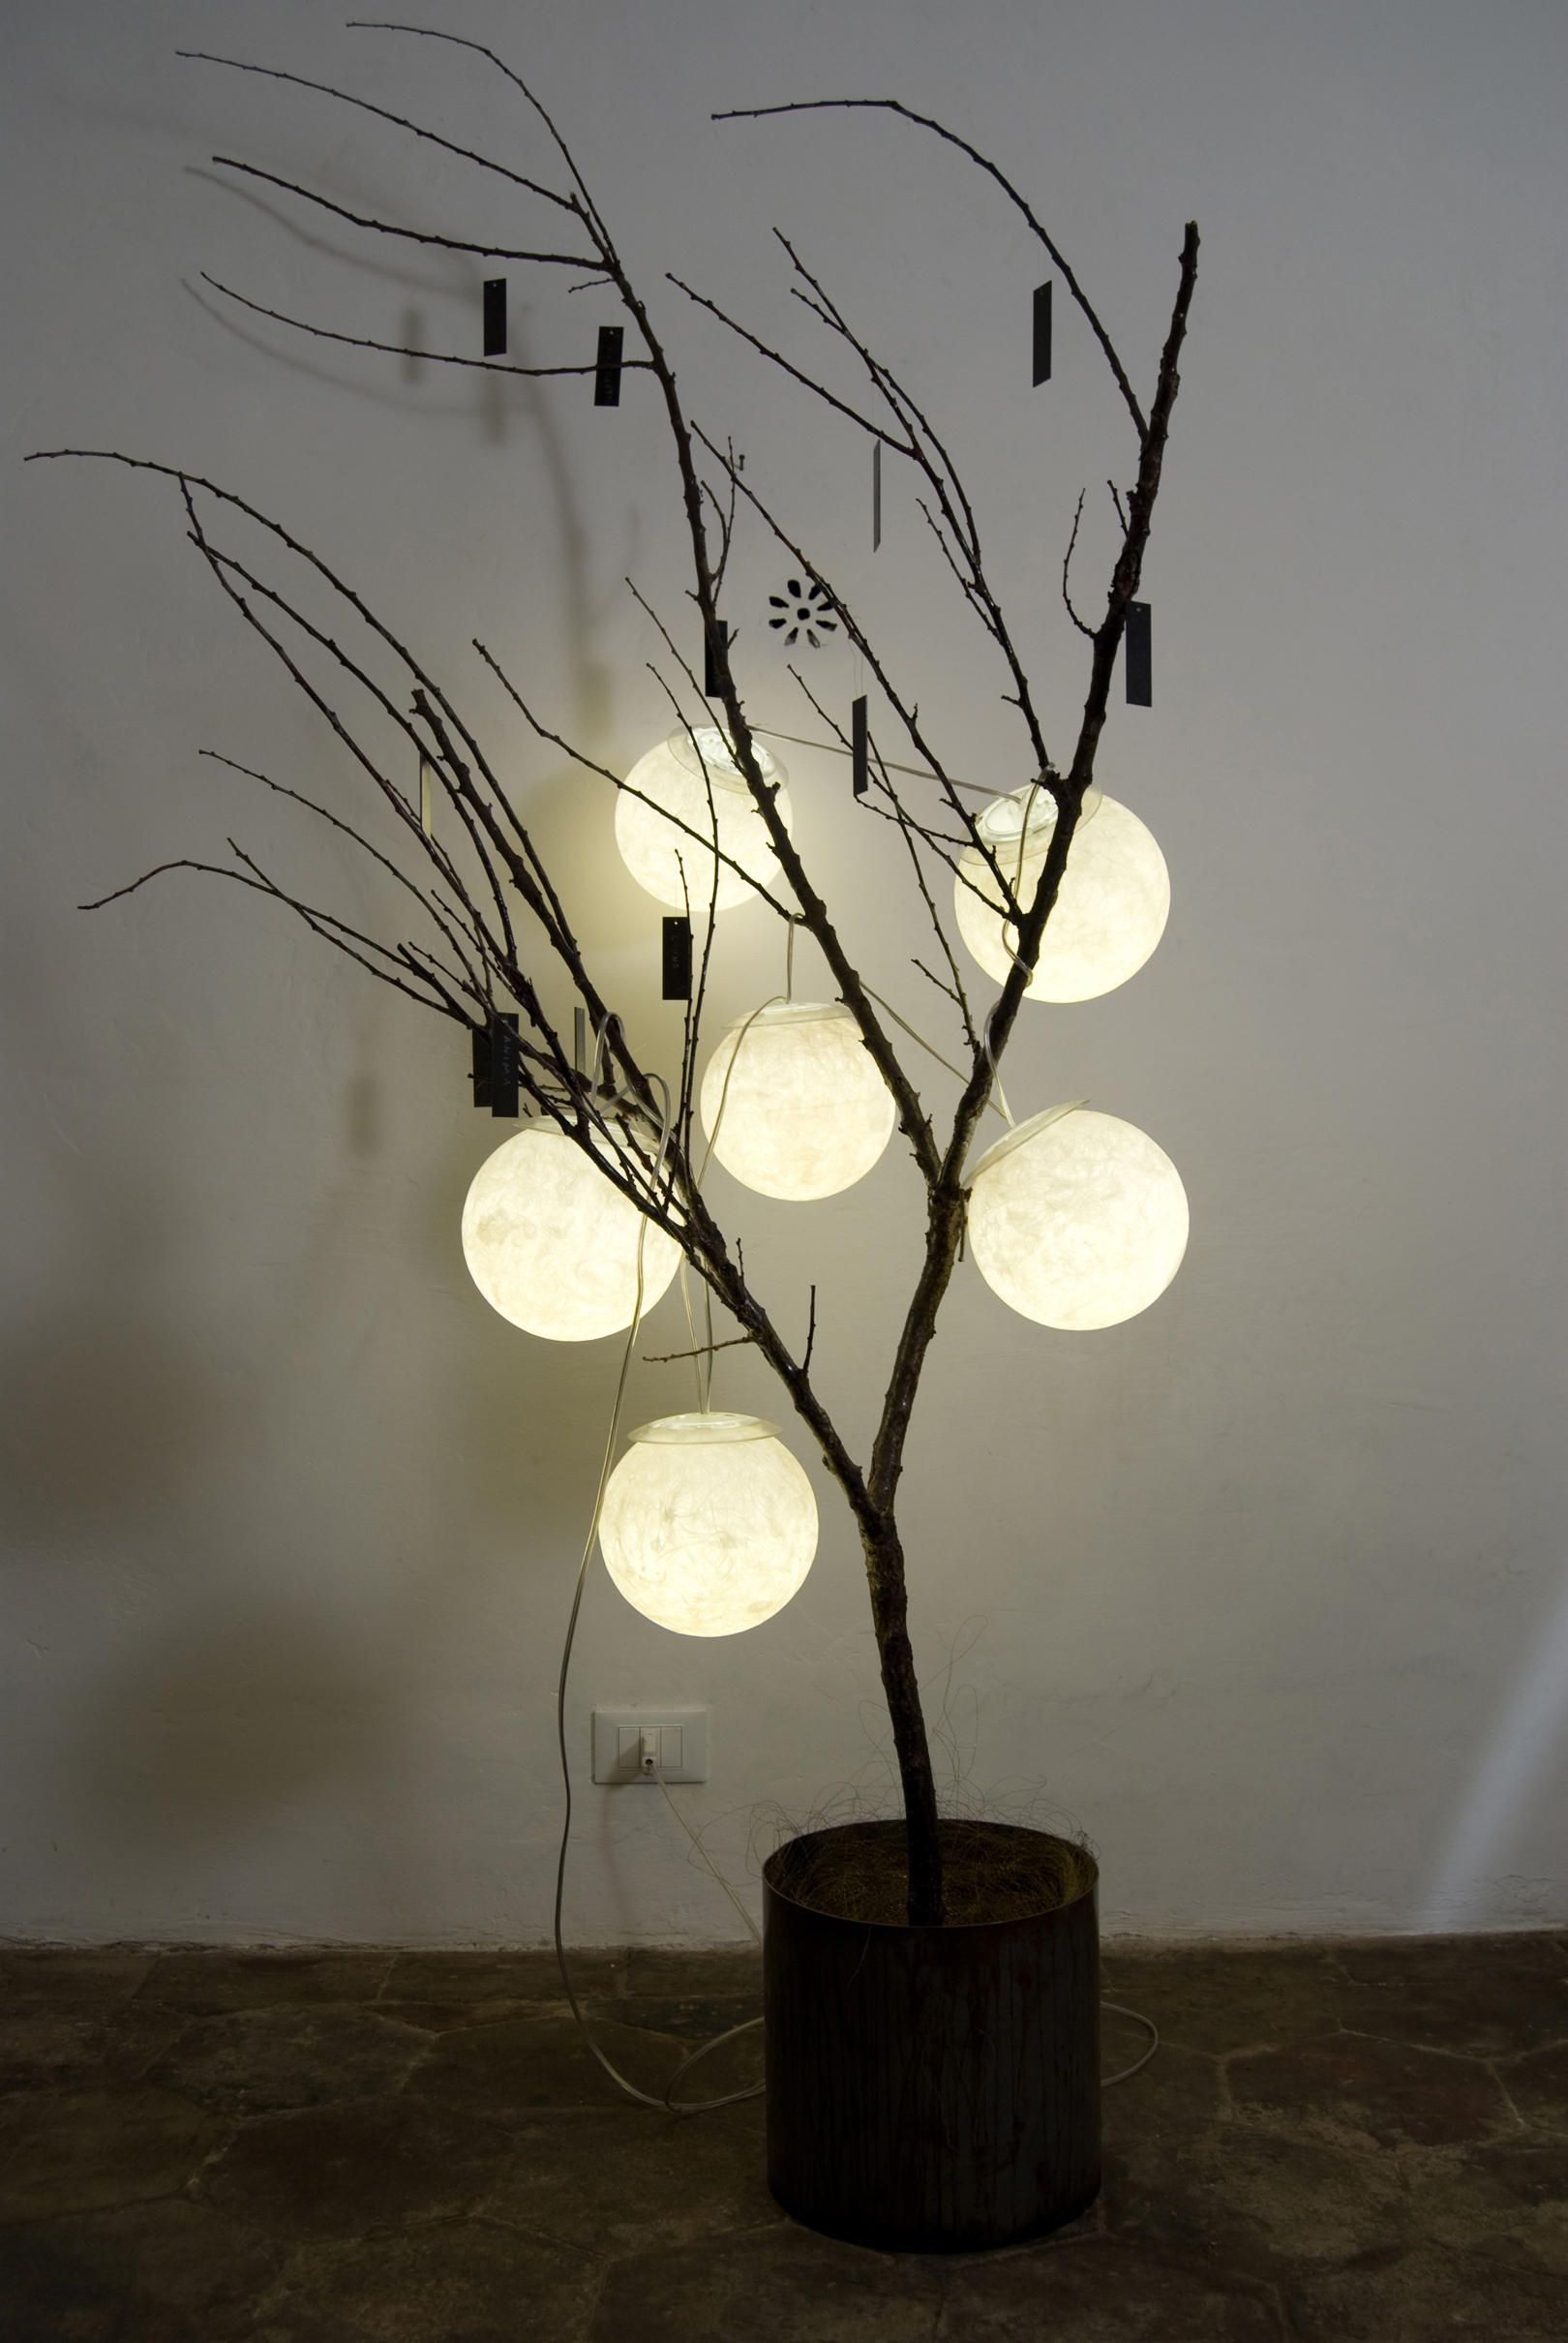 Tree Of Life Floor Lamp | Architonic With Regard To Tree Floor Lamps (View 8 of 15)